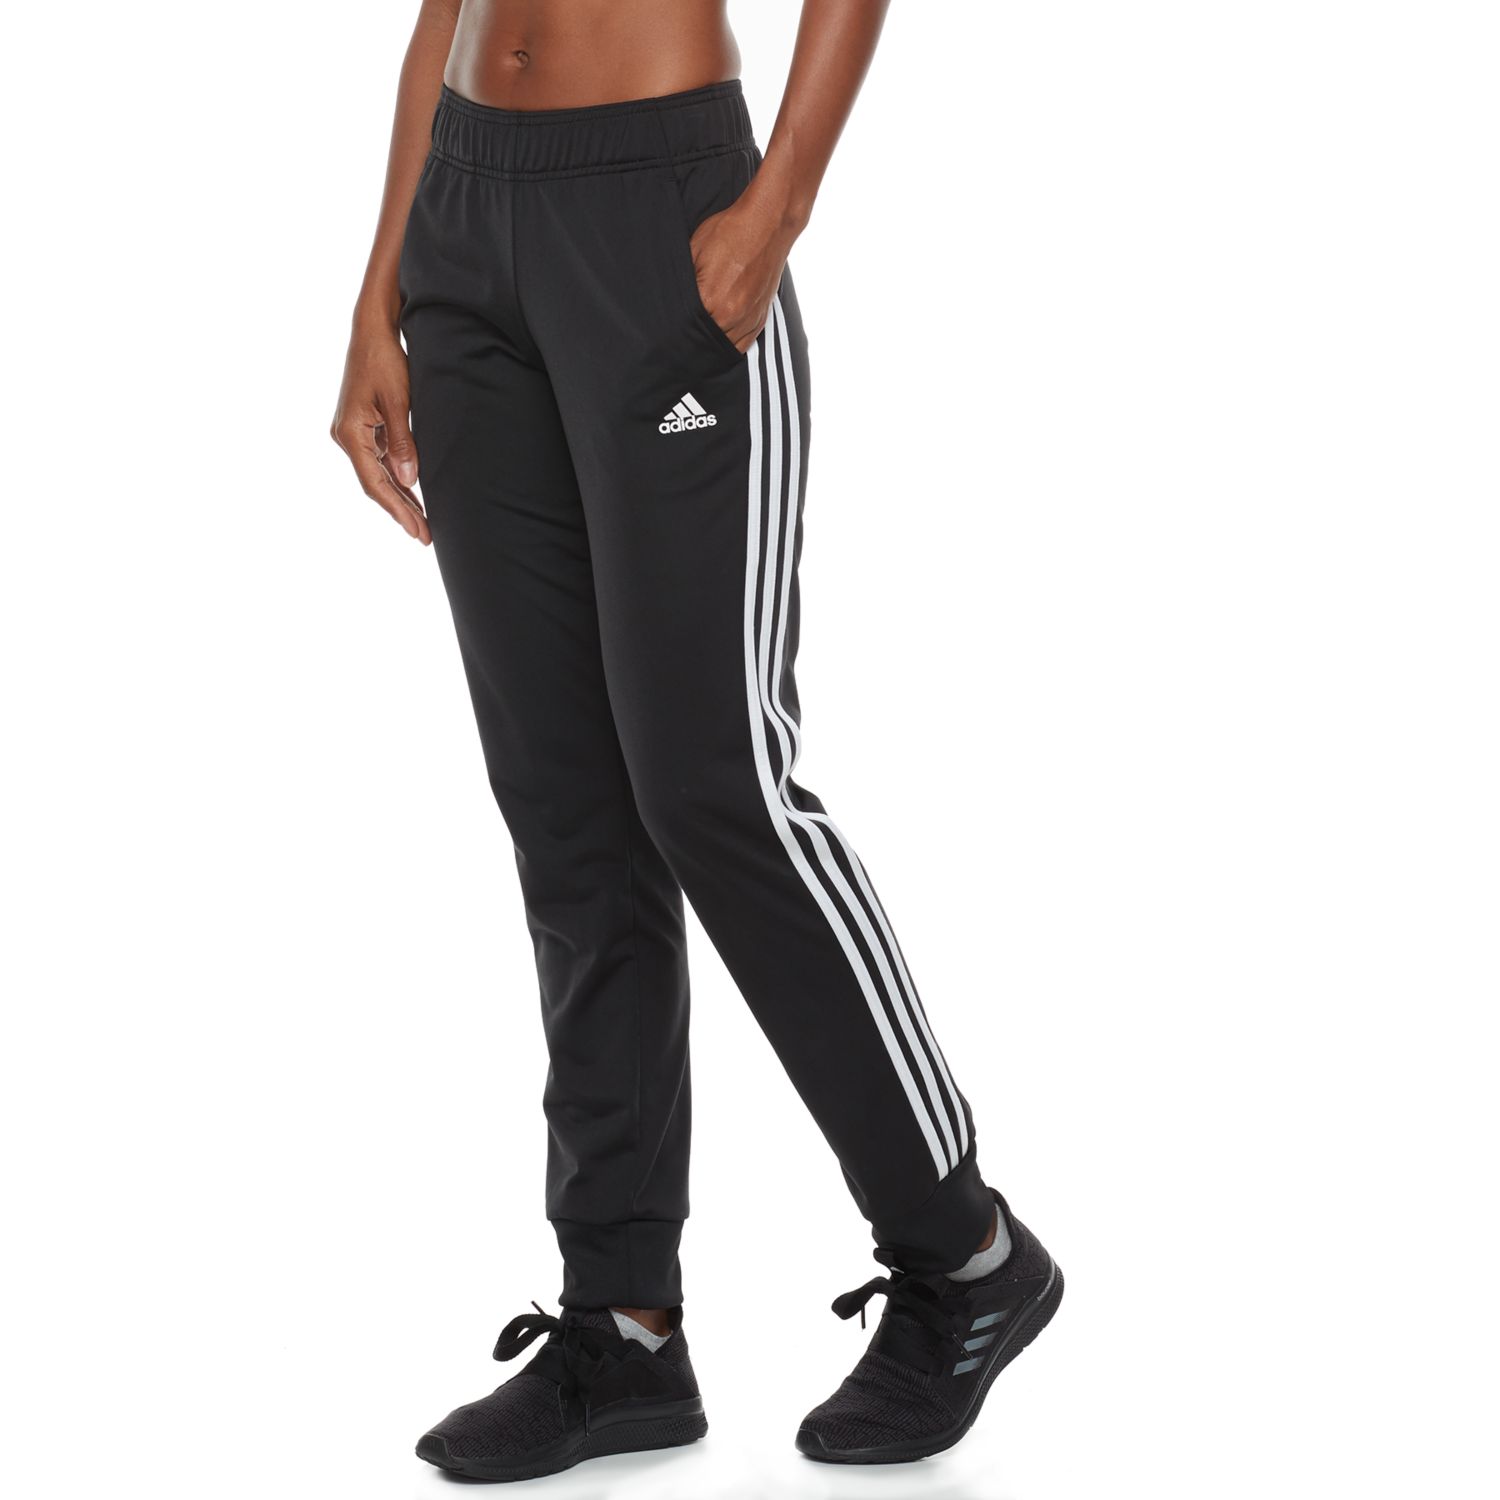 adidas designed to move track pants